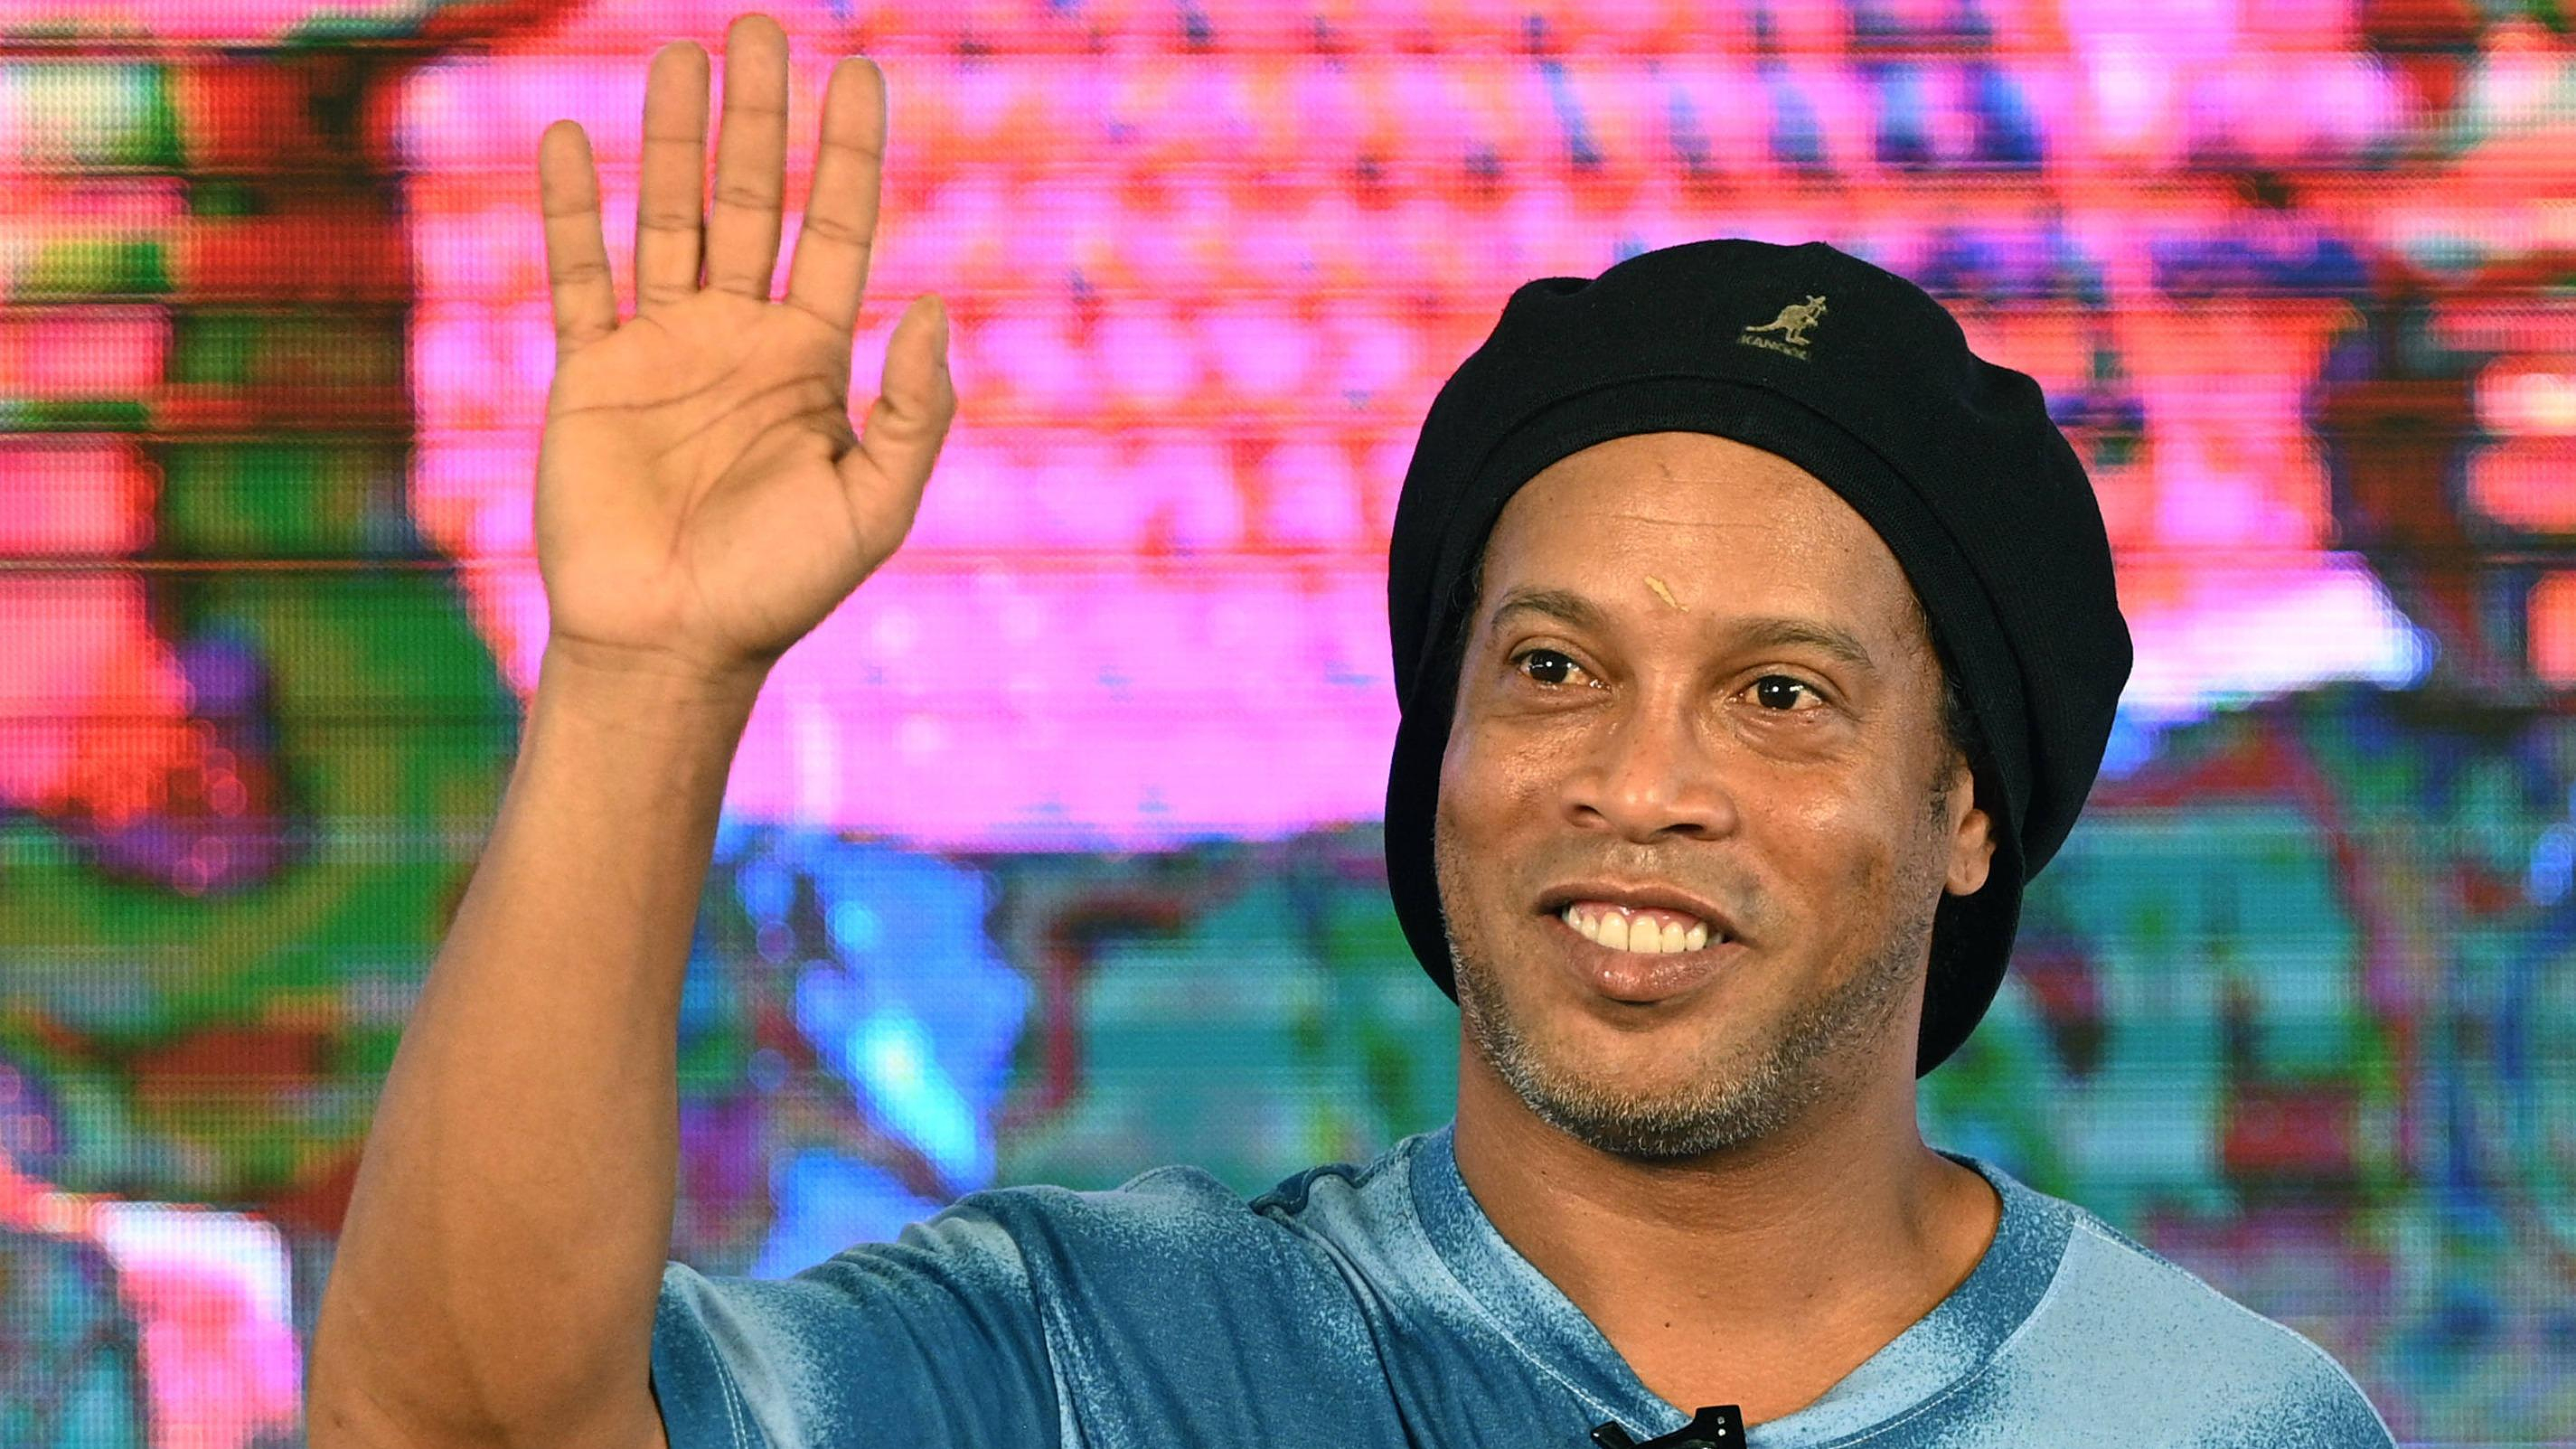 Football: the legend Ronaldinho will play a match... in Guadeloupe